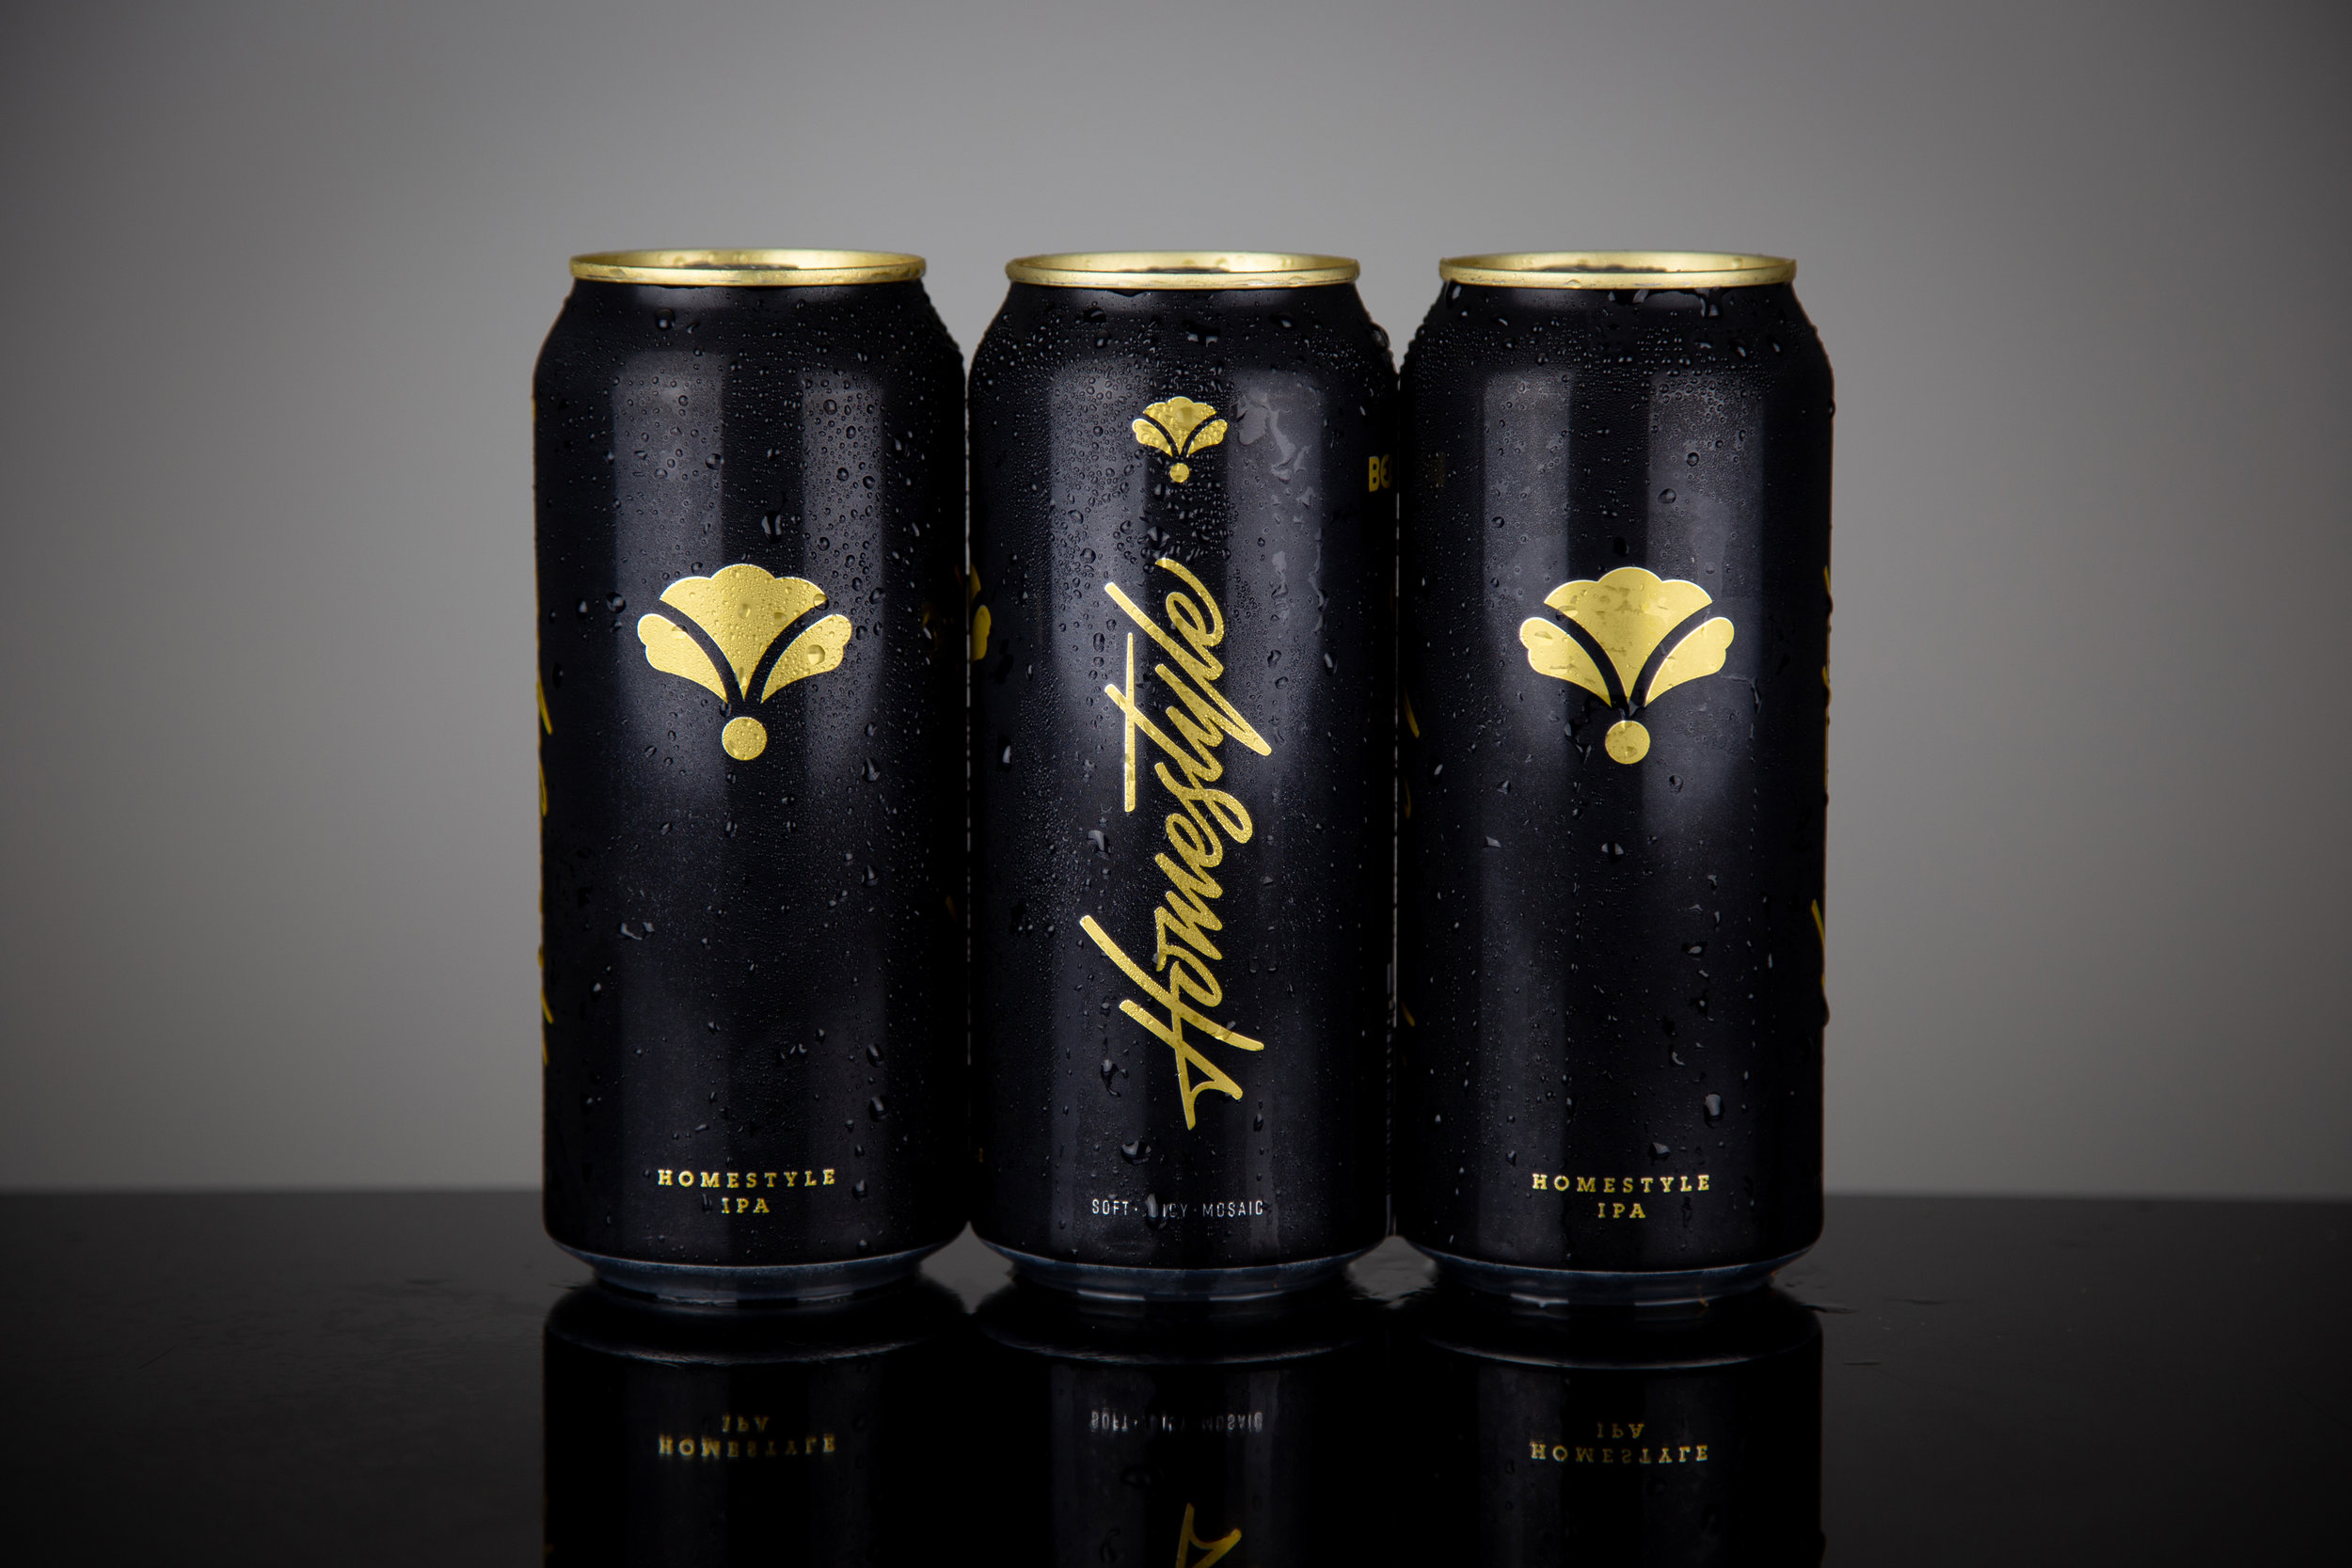 A Nashville’s Premium Homestyle IPA Gets a Brand and Packaging Design Facelift